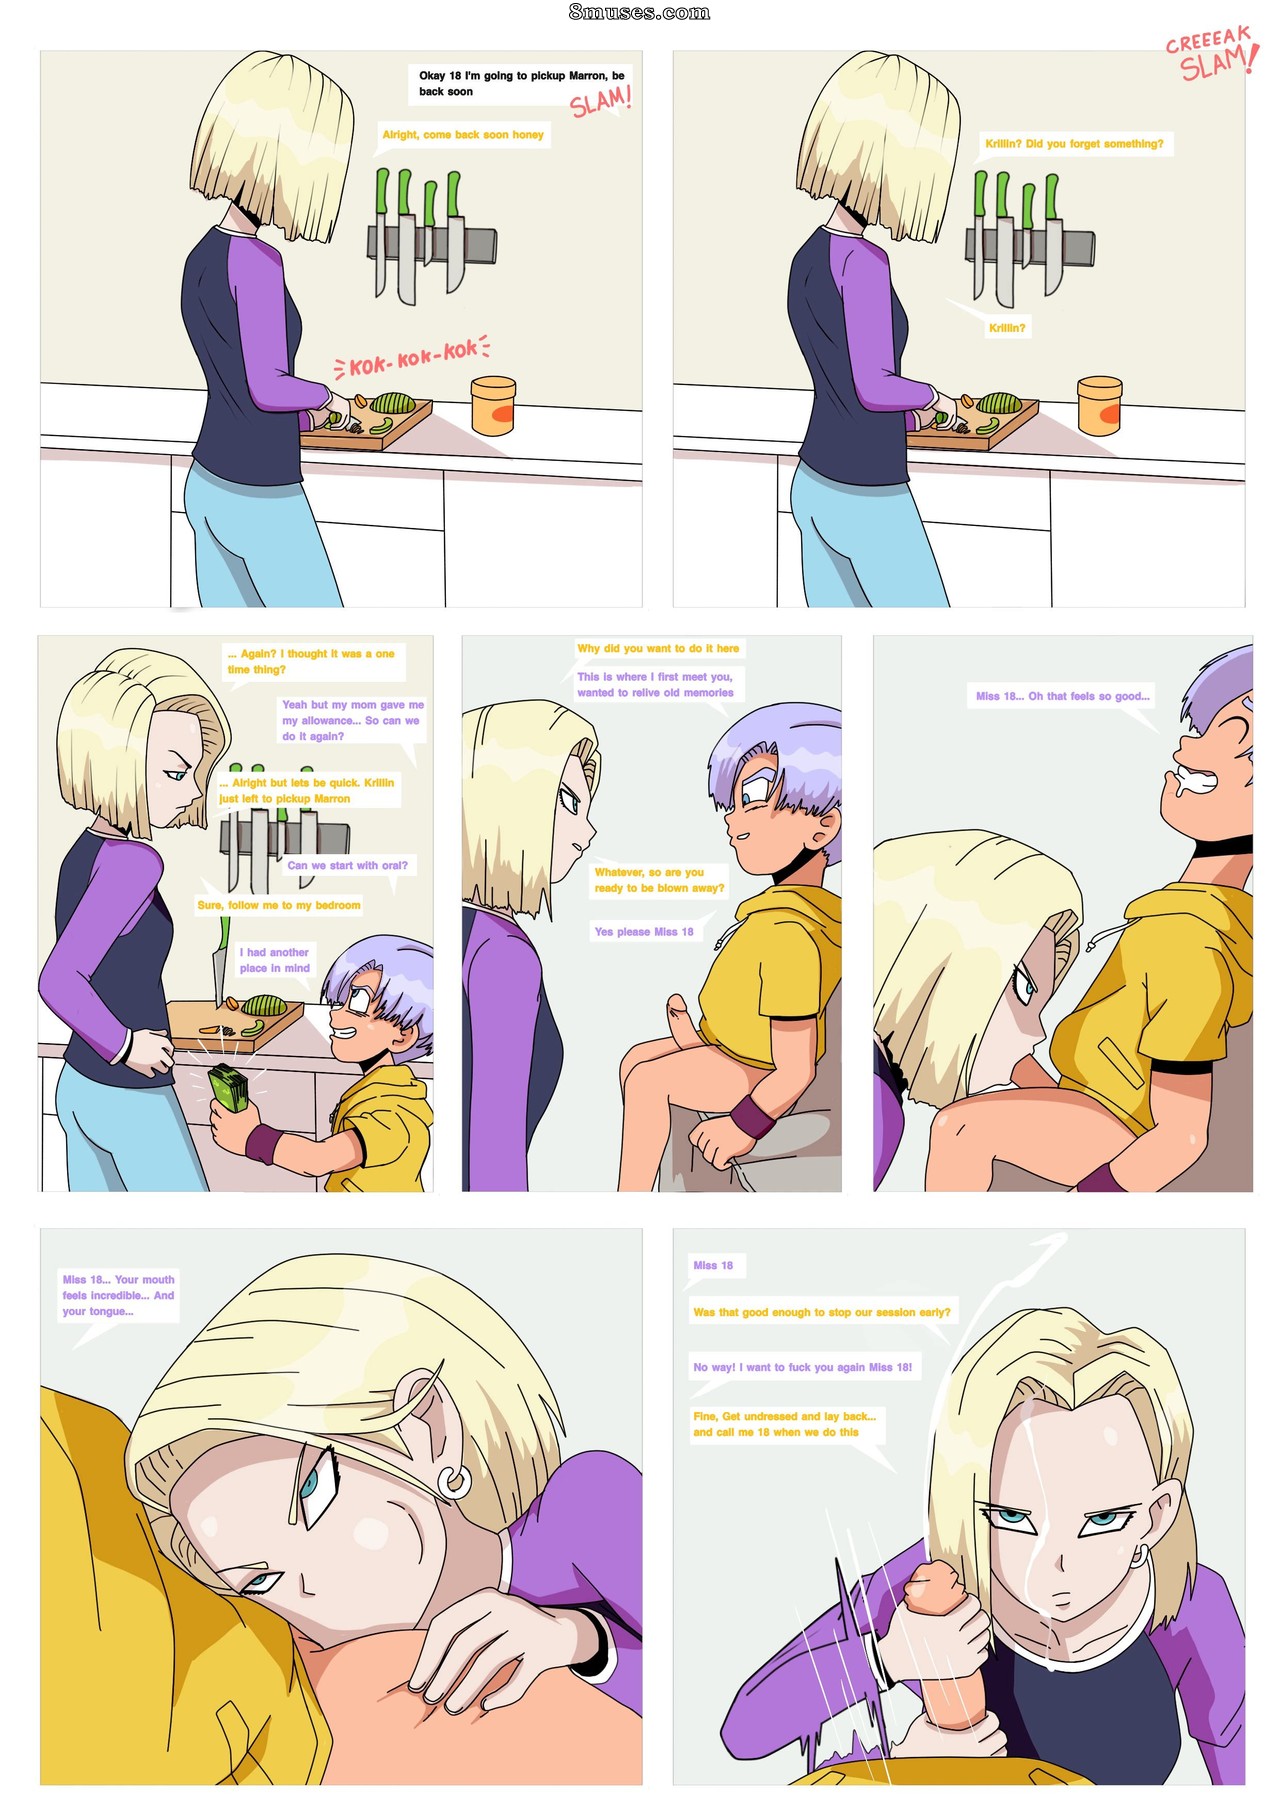 Android 18 Orgy - Trunks x Android 18 - 8muses Comics - Sex Comics and Porn Cartoons